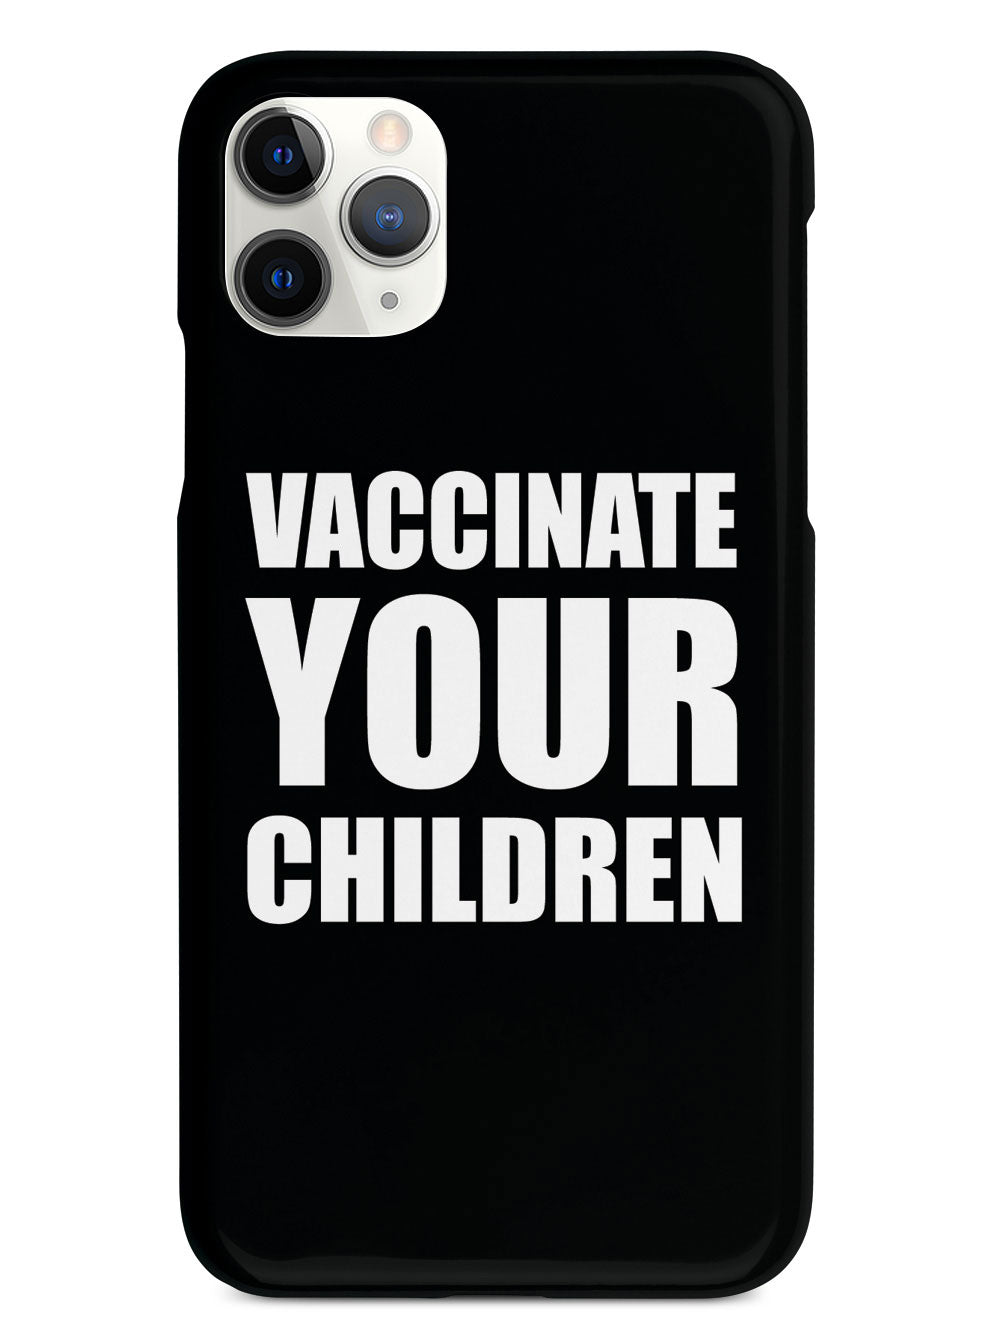 Vaccinate Your Children - Pro-Vaccination Awareness Case